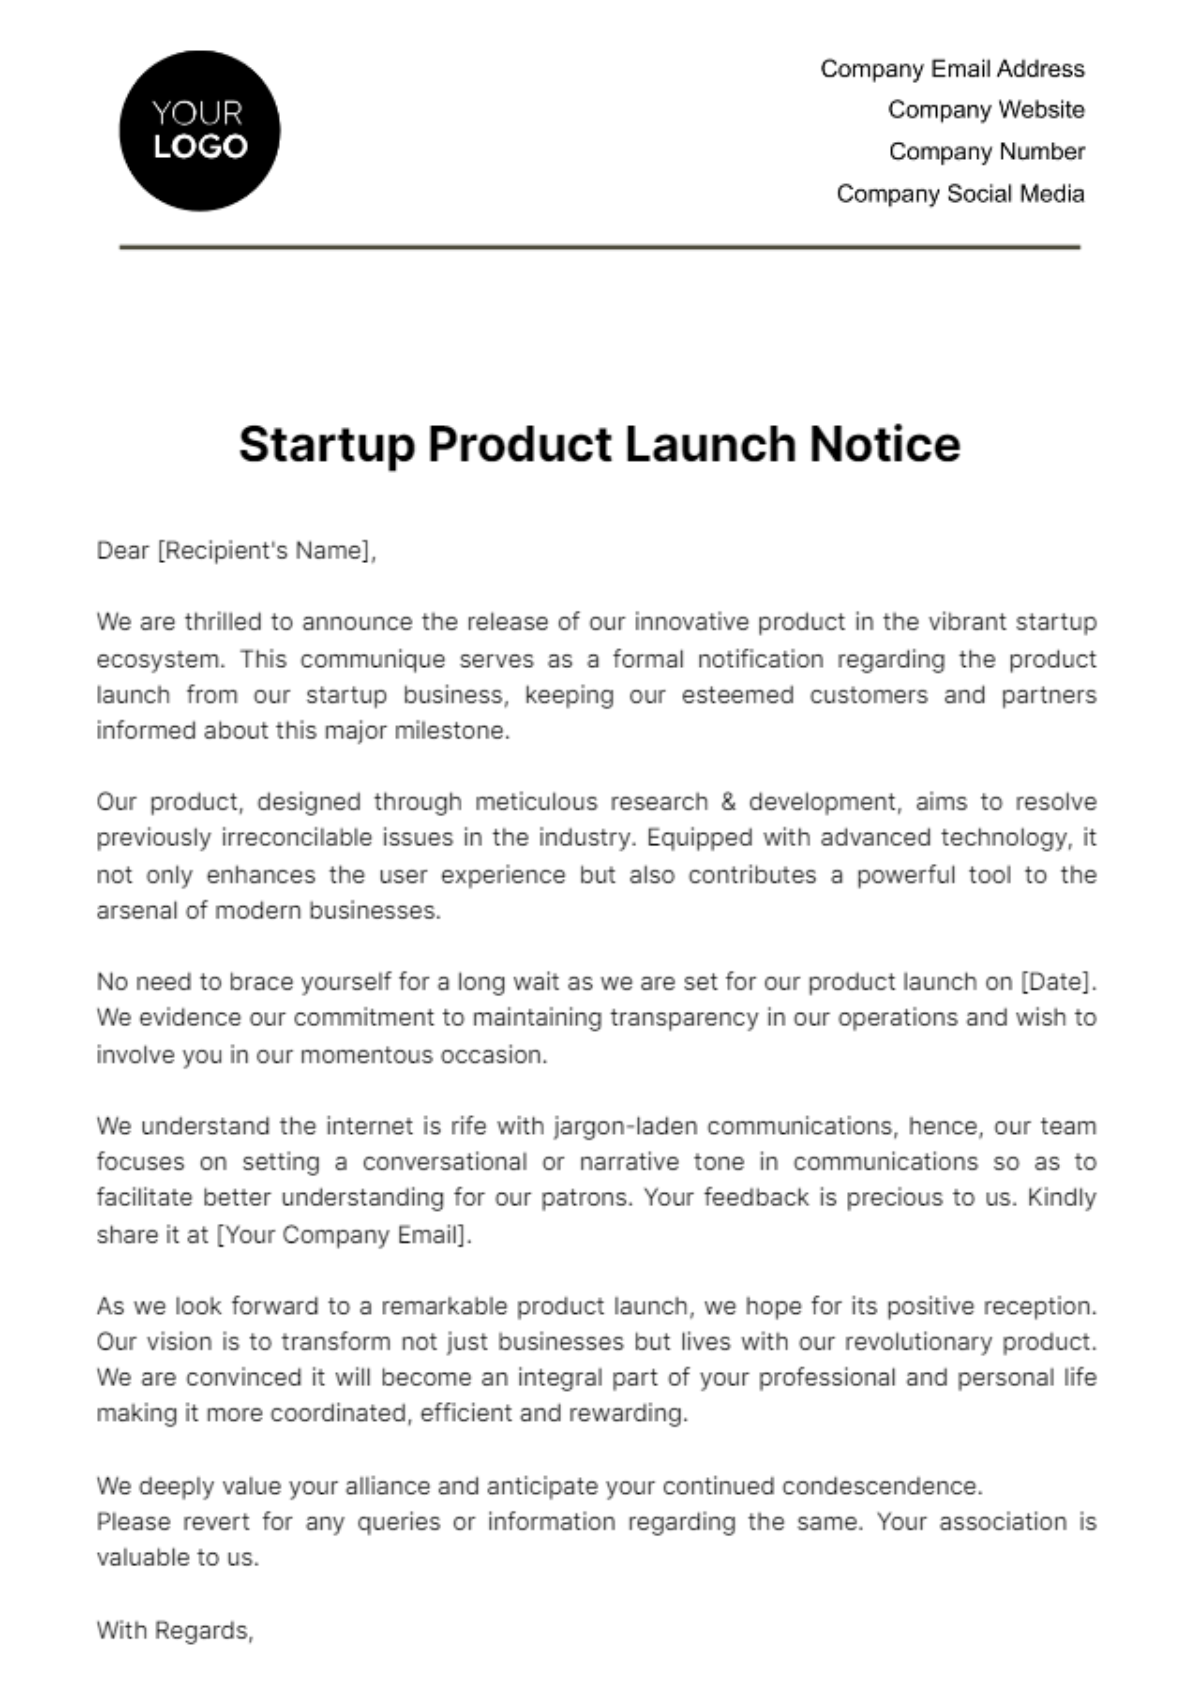 Free Startup Product Launch Notice Template